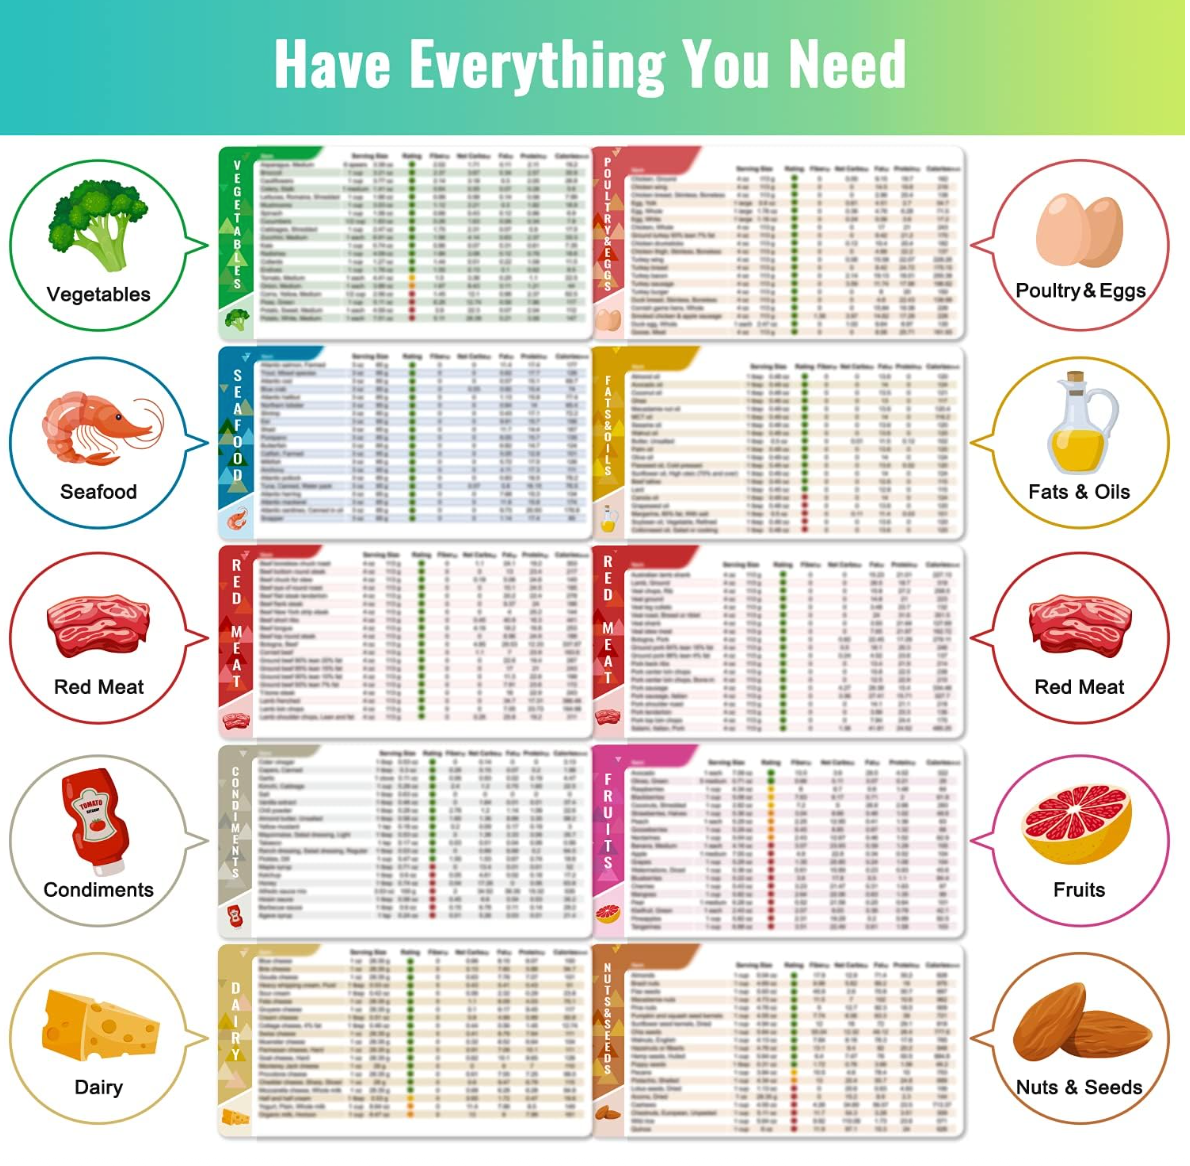 Keto Diet Cheat Sheet Magnets Kit, Magnetic Quick Reference Keto Food List Guide Charts 239 Foods and Swap for Beginners with Keto Tracker Log Macro Carbs Counter Journal Planner, Body Measuring Tape